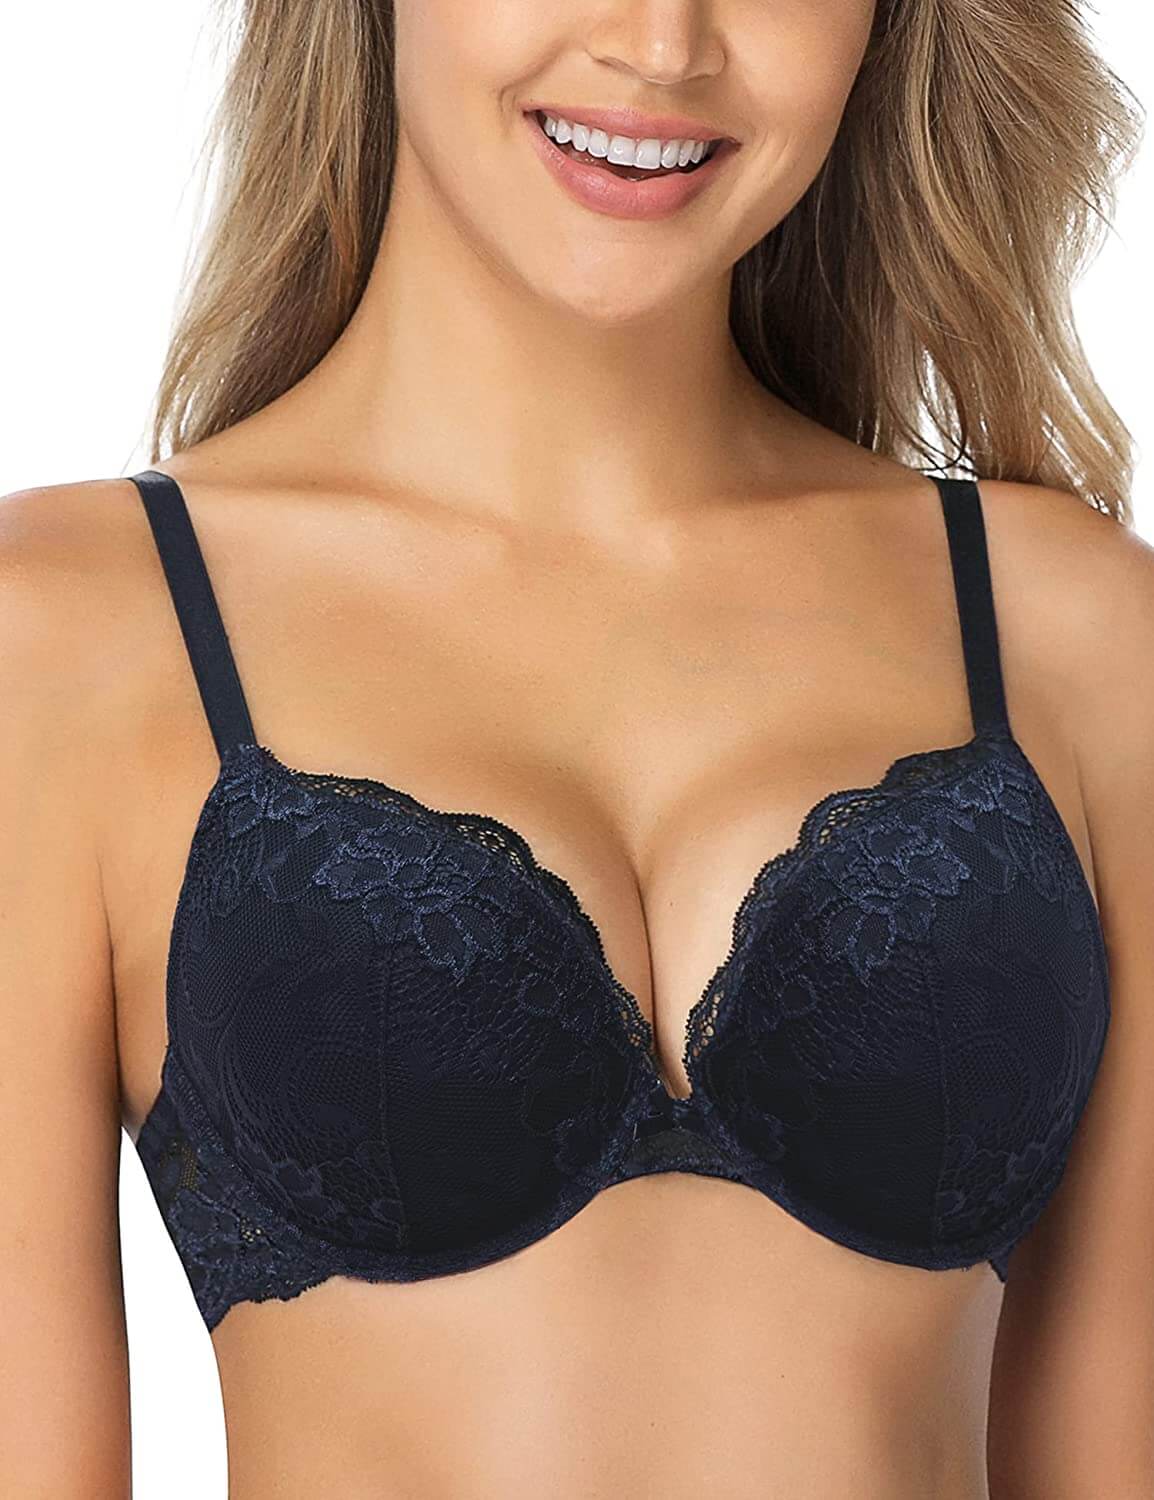 Wonderbra - The sexy lift of a push-up bra meets the fuller